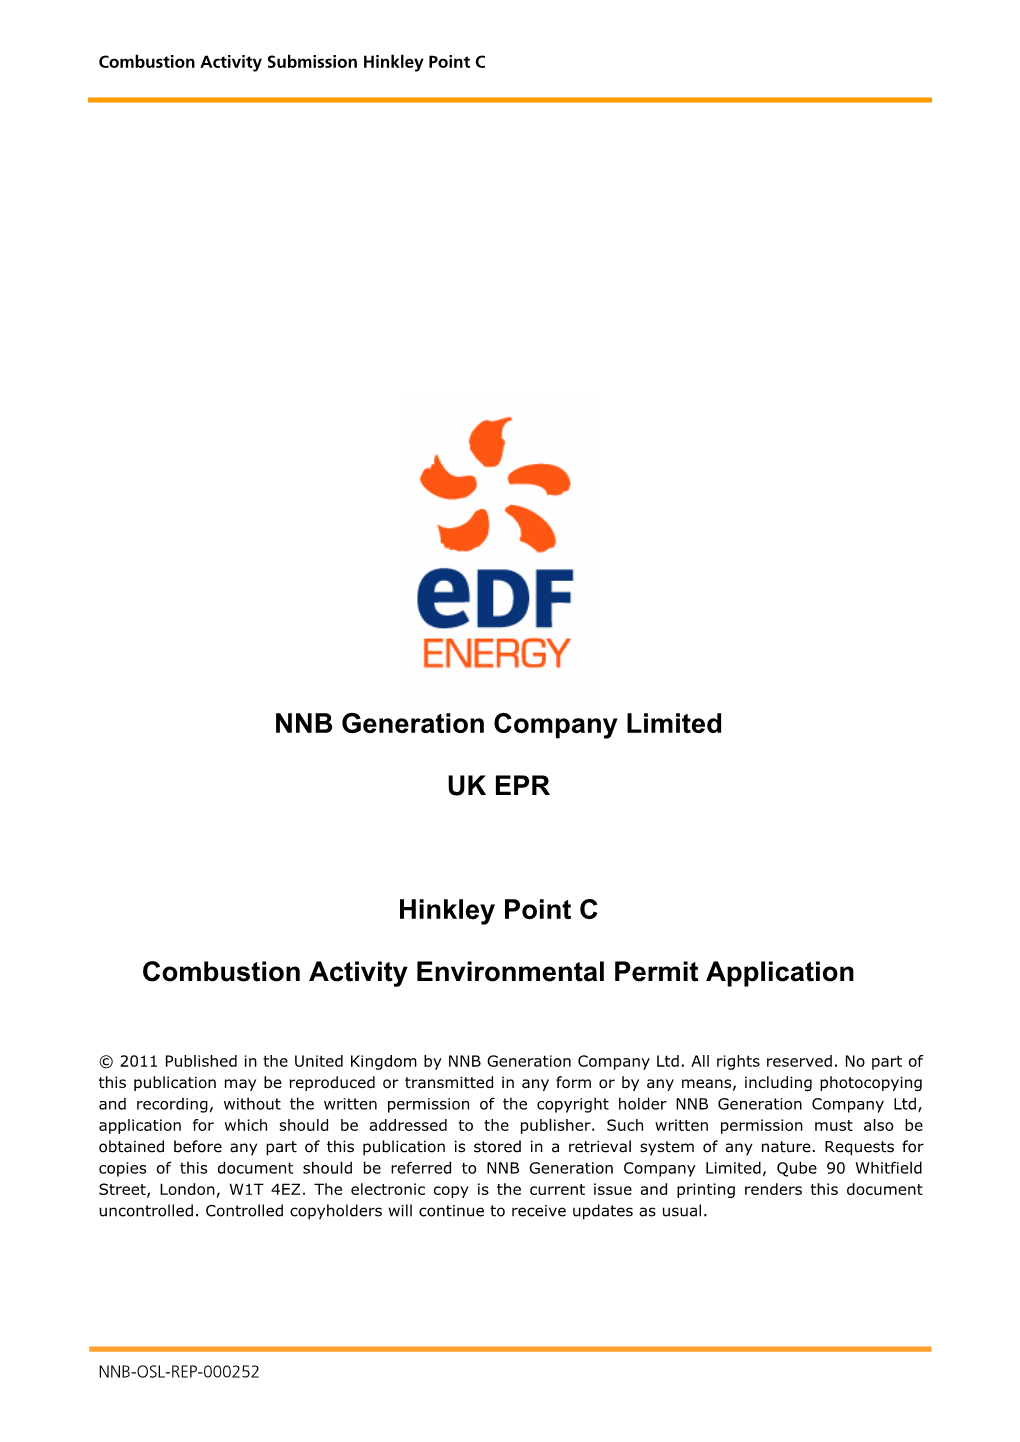 NNB Generation Company Limited UK EPR Hinkley Point C Combustion